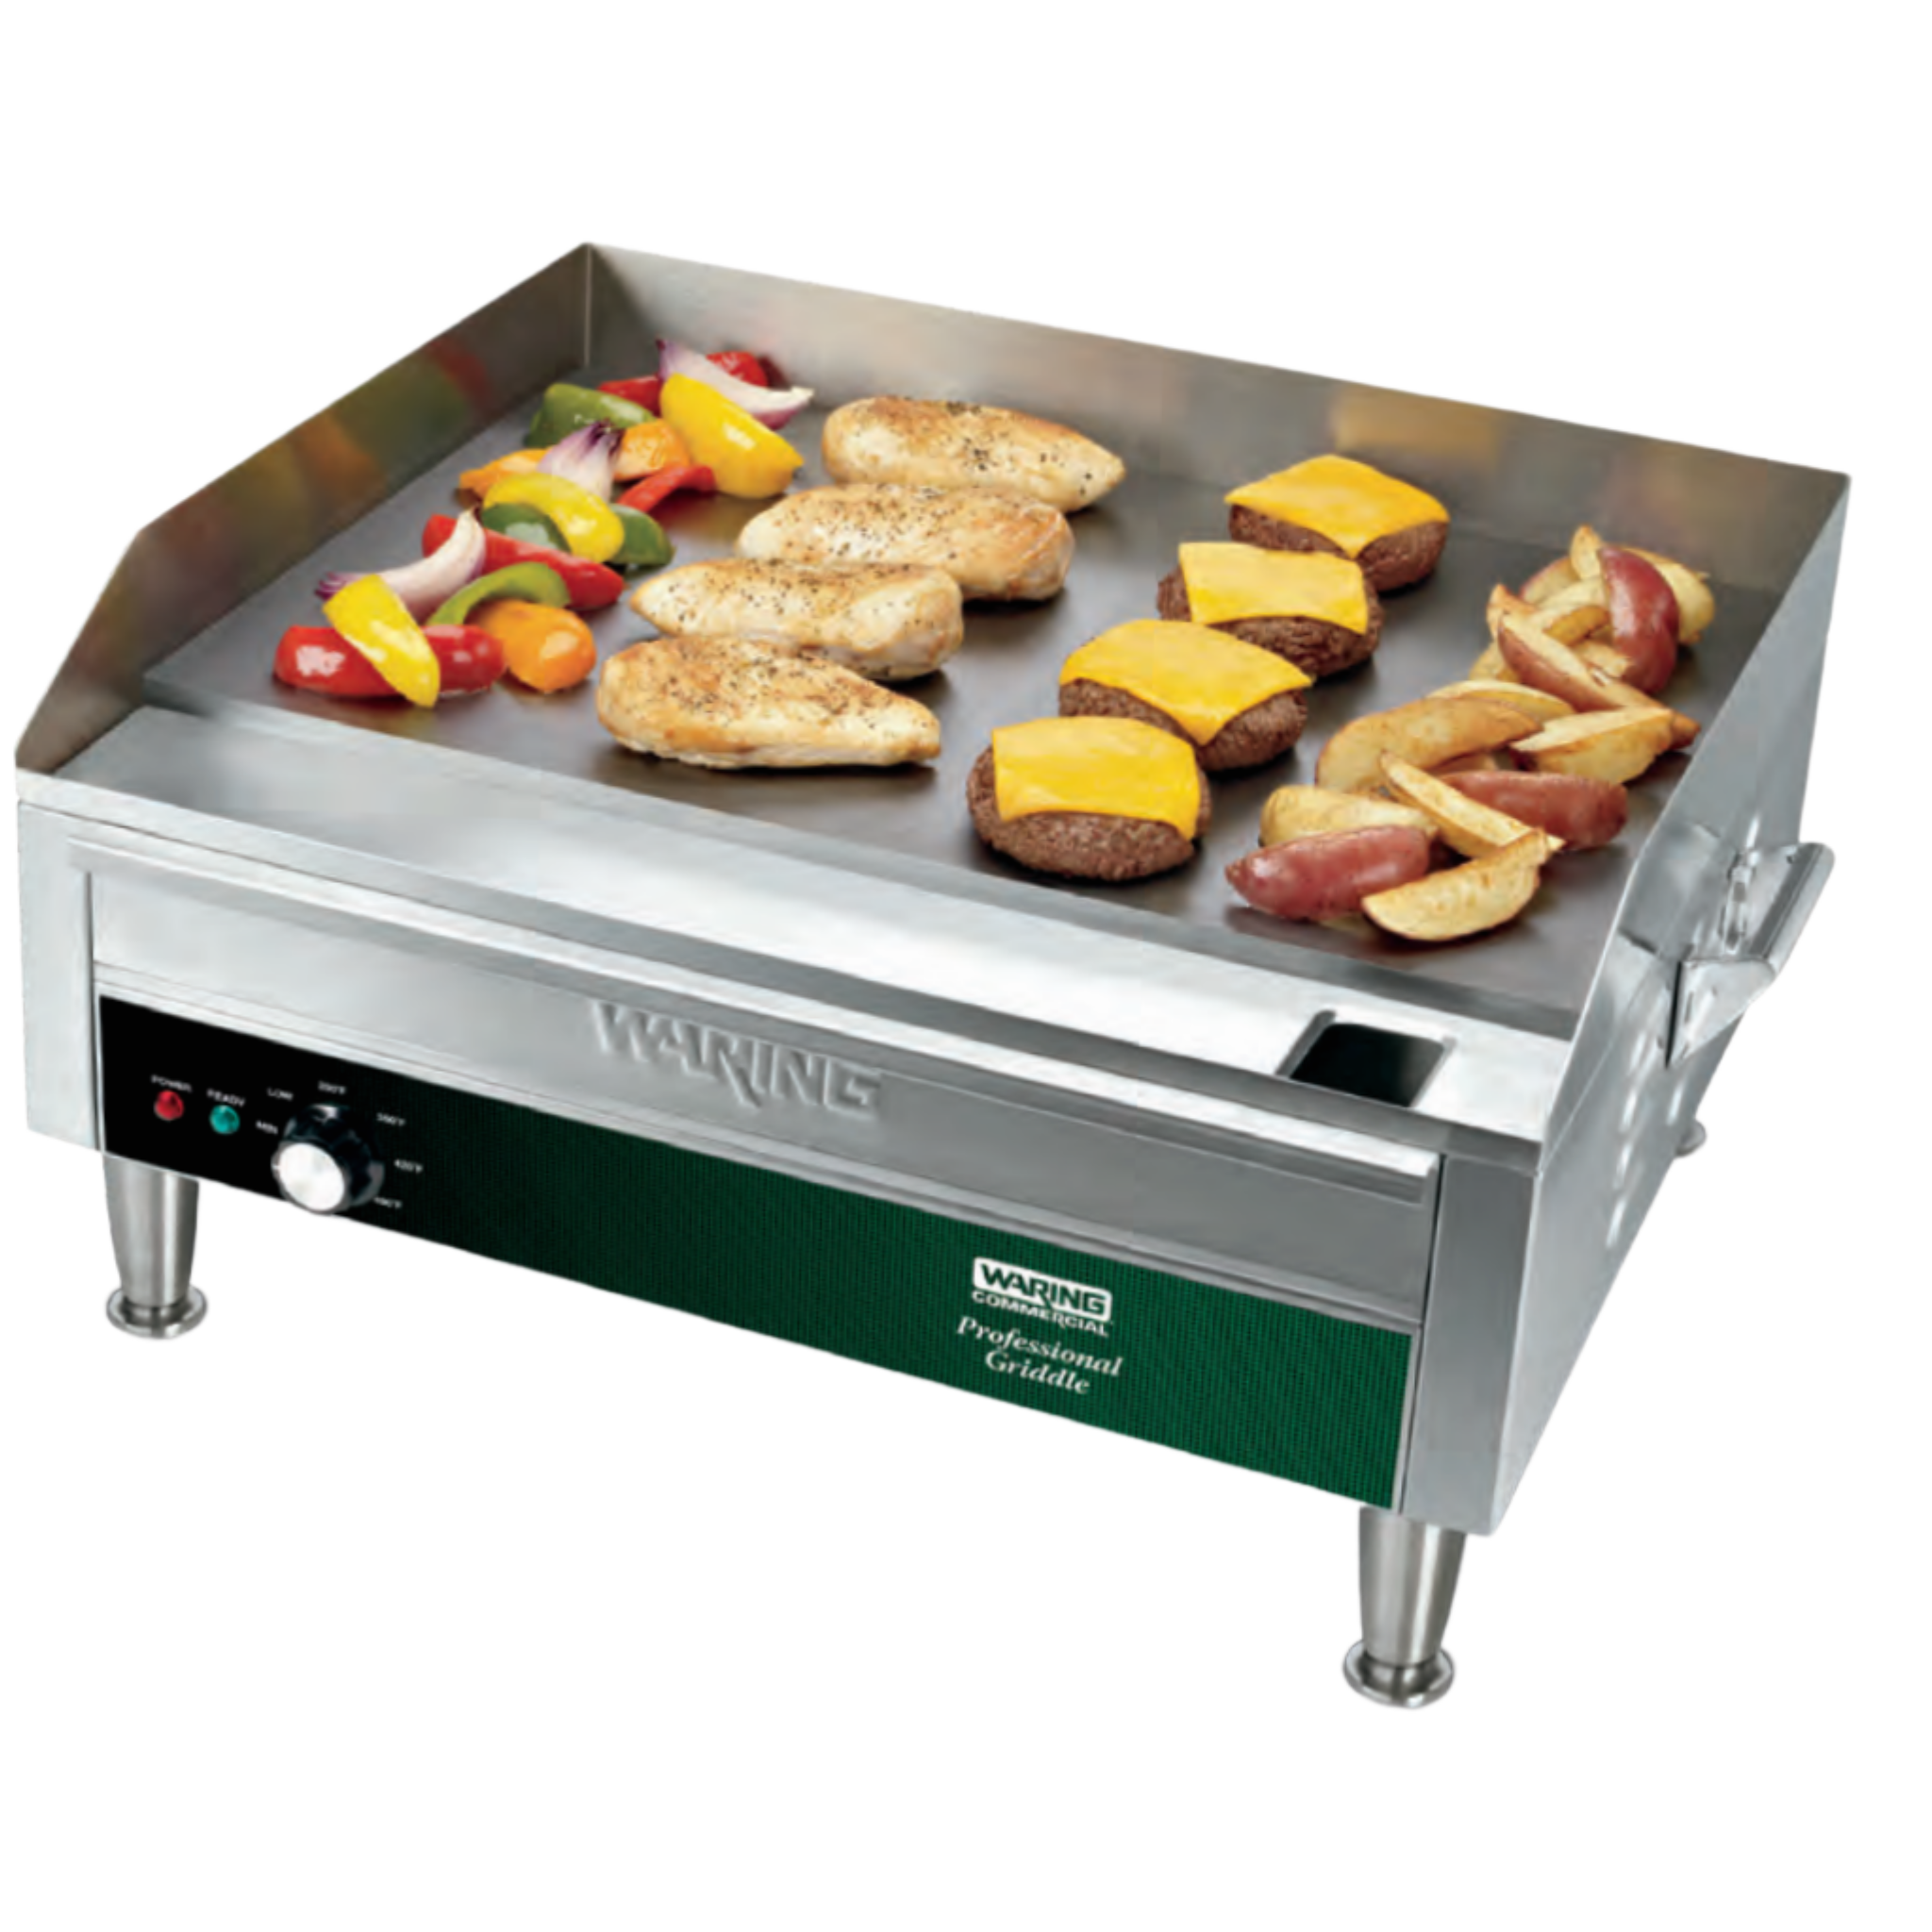 WGR240X Professional Large Countertop Electric Griddle by Waring Commercial